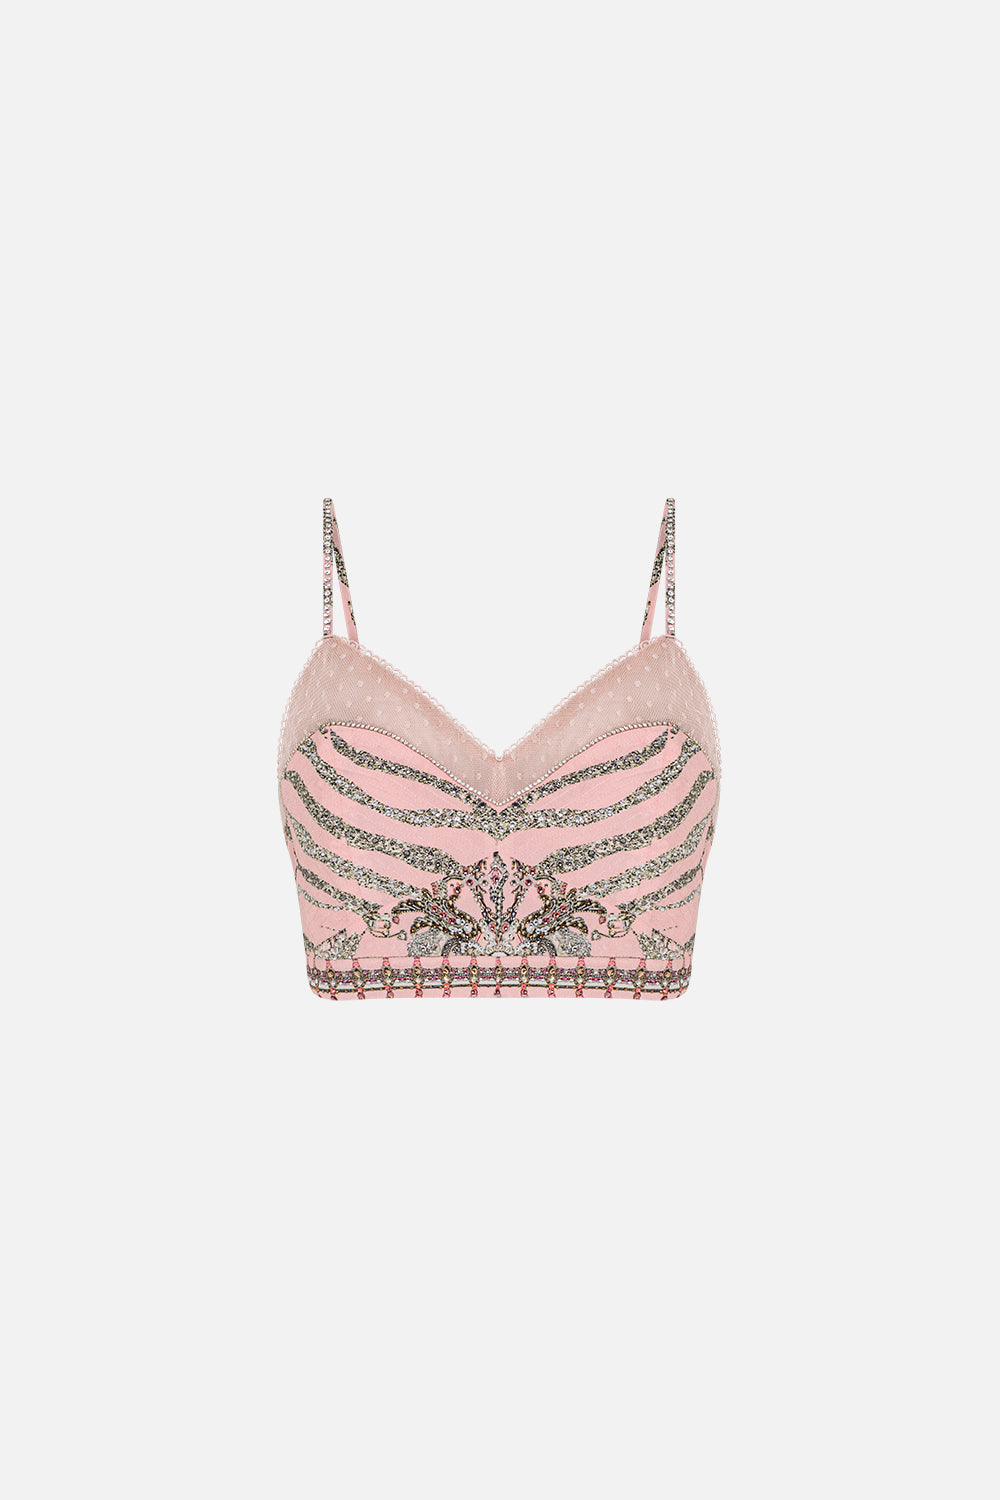 QUILTED BRALETTE STARSHIP SISTAS